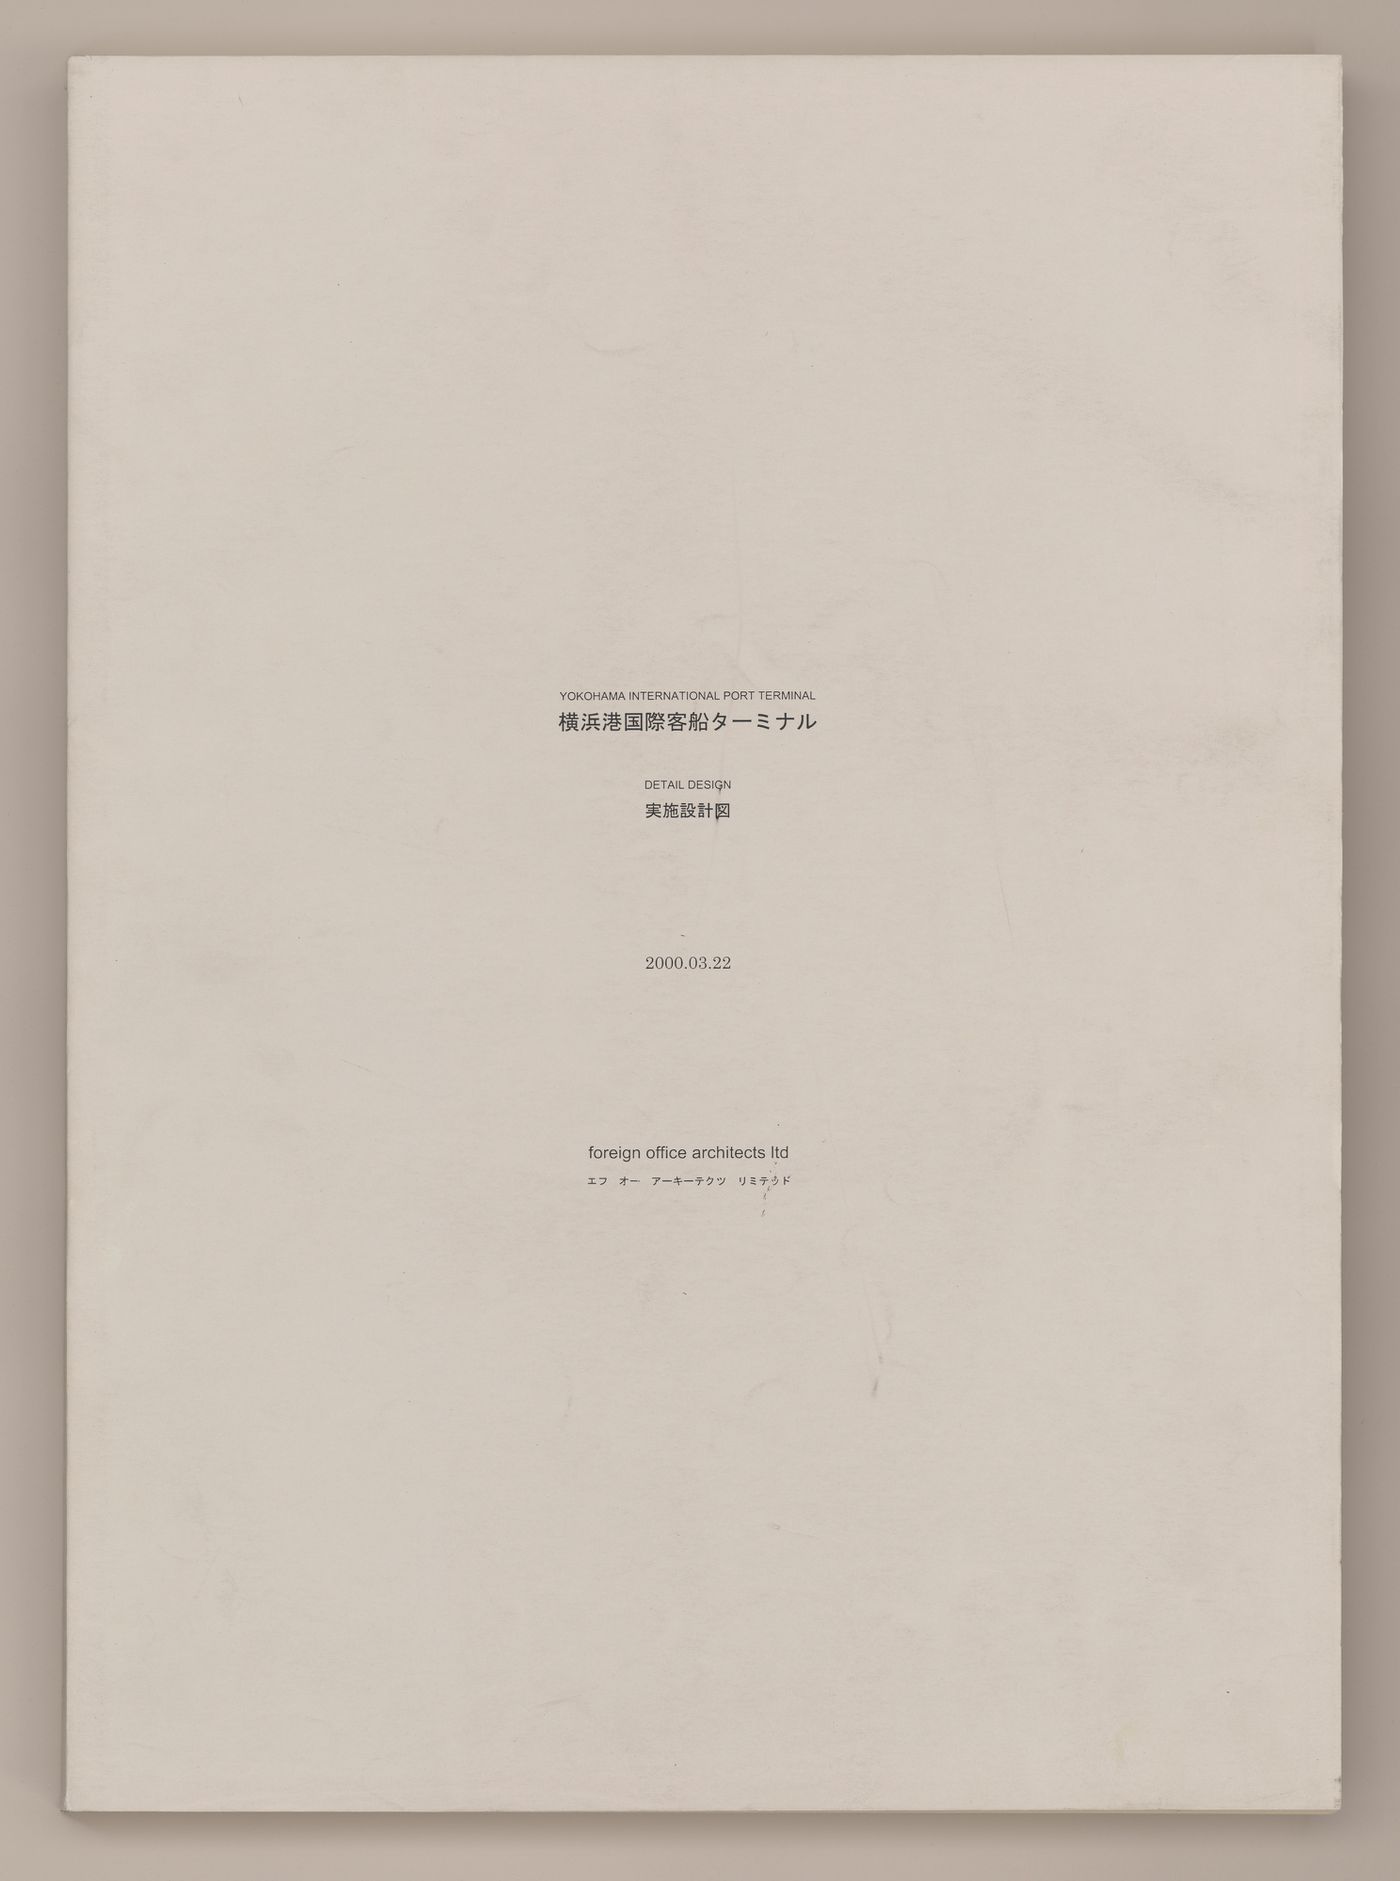 Cover page of a book of technical drawings for Yokohama International Ferry Port Terminal